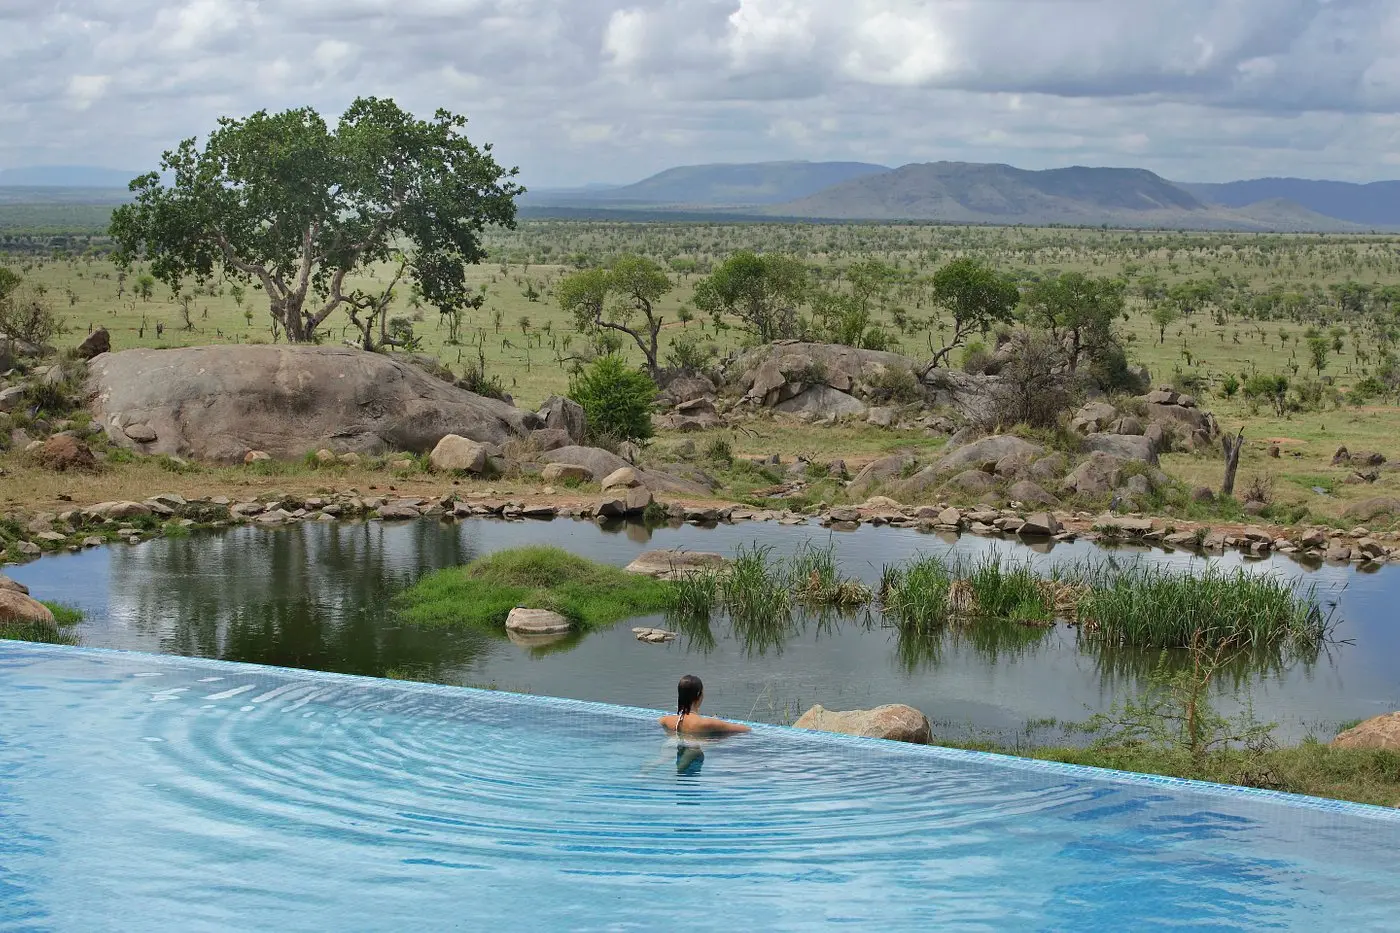 Serene pool in the Serengeti, surrounded by lush greenery and tranquility.